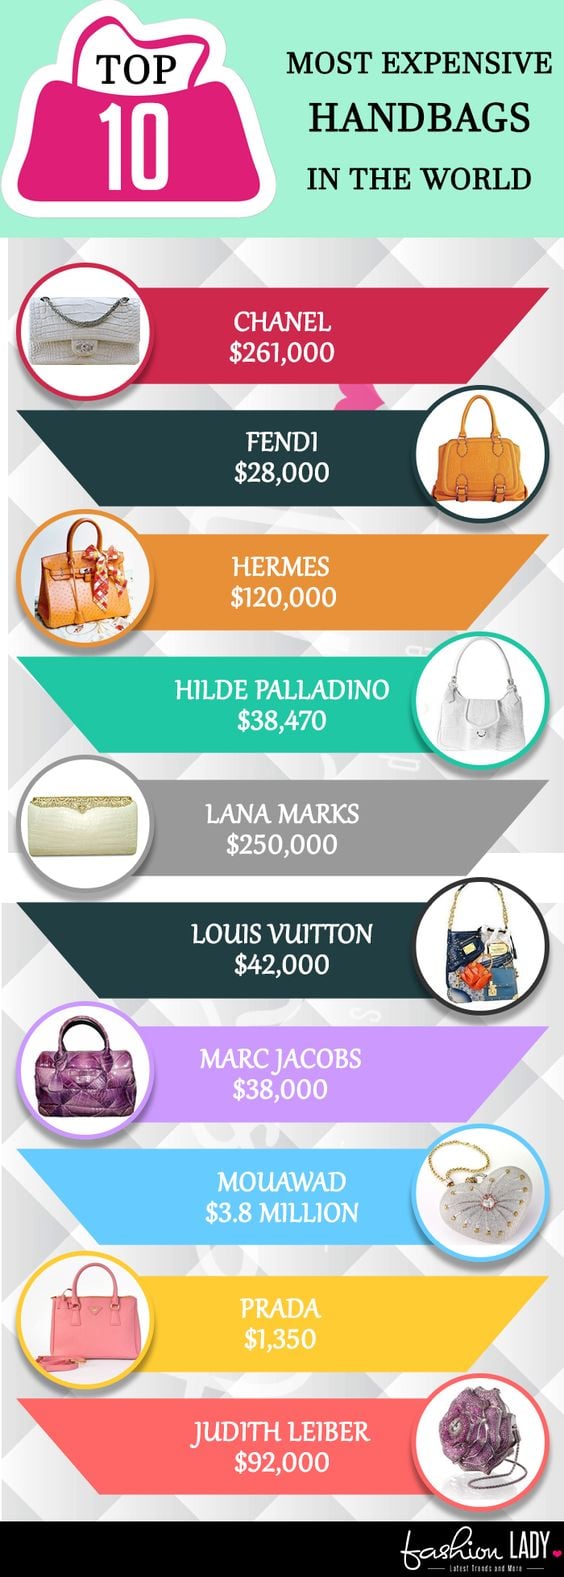 top 10 most expensive bag brands